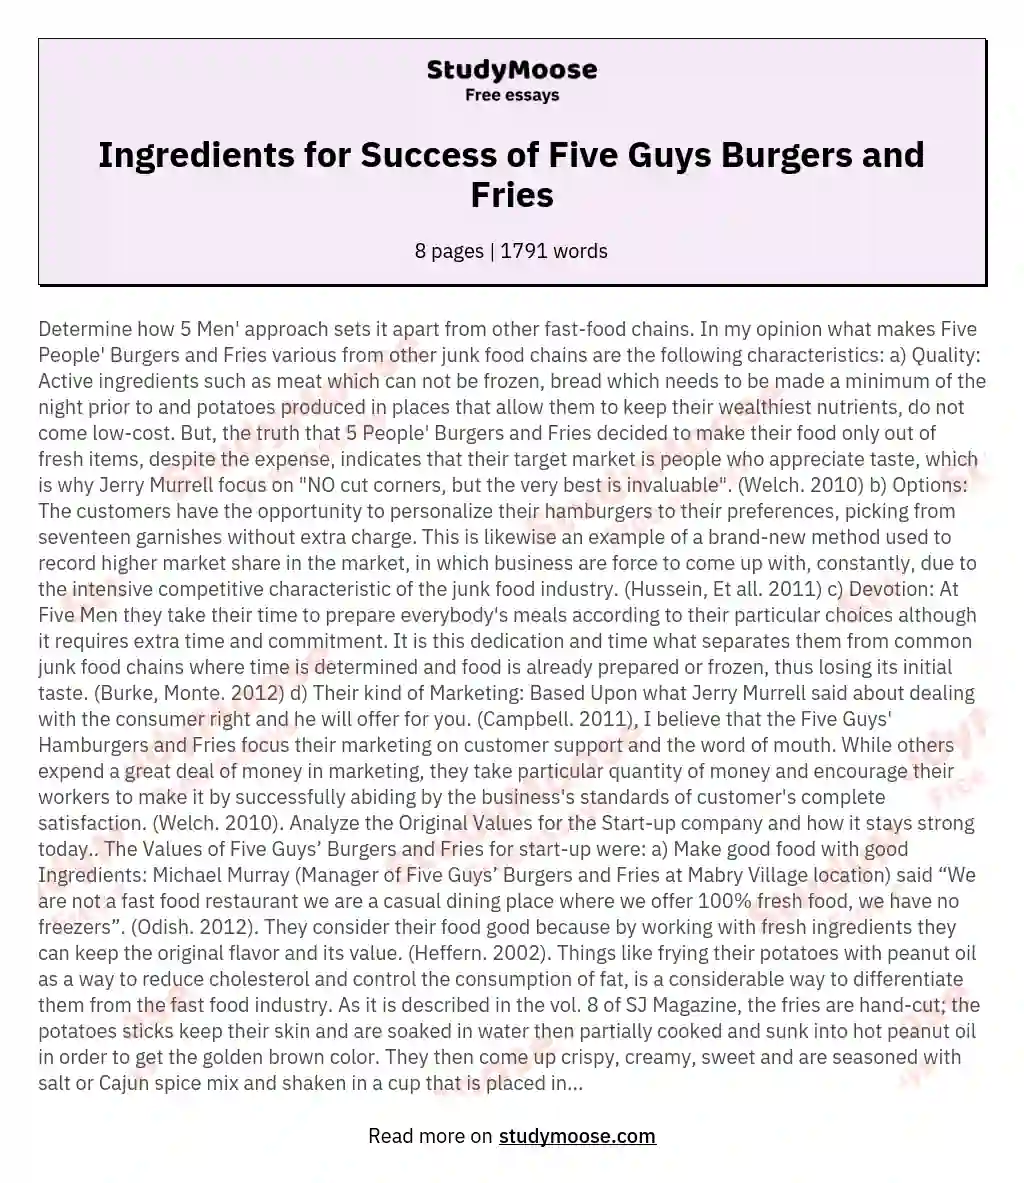 Ingredients for Success of Five Guys Burgers and Fries essay